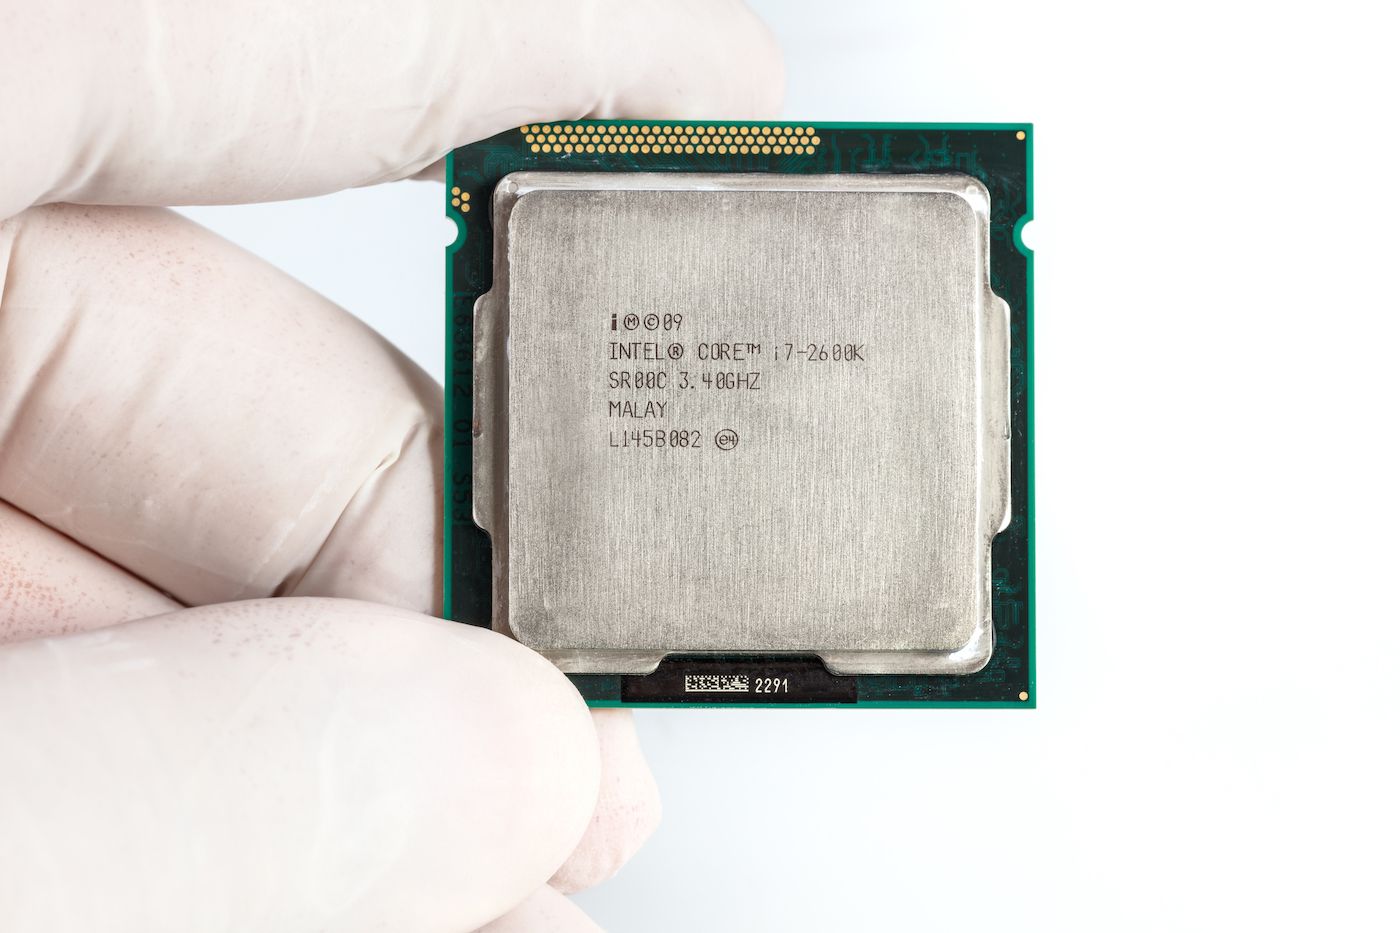 CPU isolated on white background, an Intel Core i7-2600K SR00.